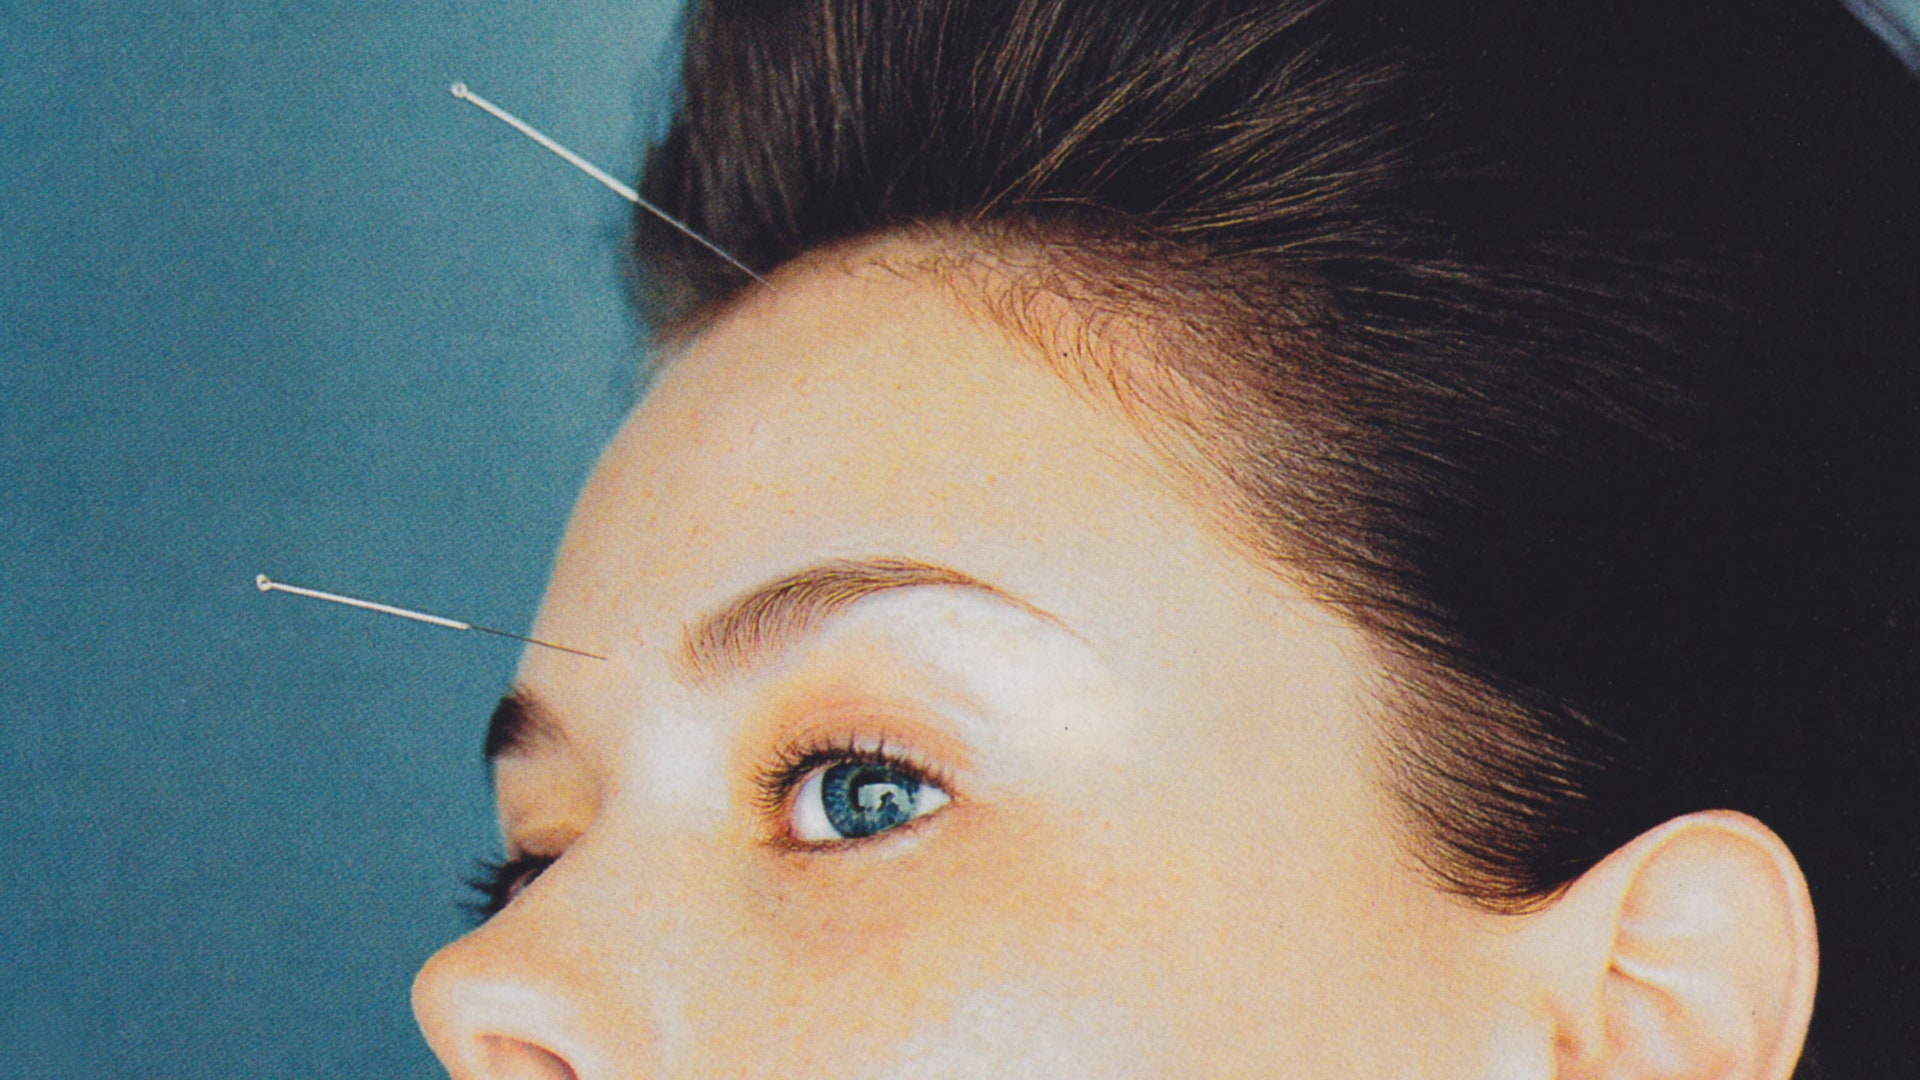 Gotham Wellness's Facial Acupuncture Treatment Is the Key to Glowing Spring Skin